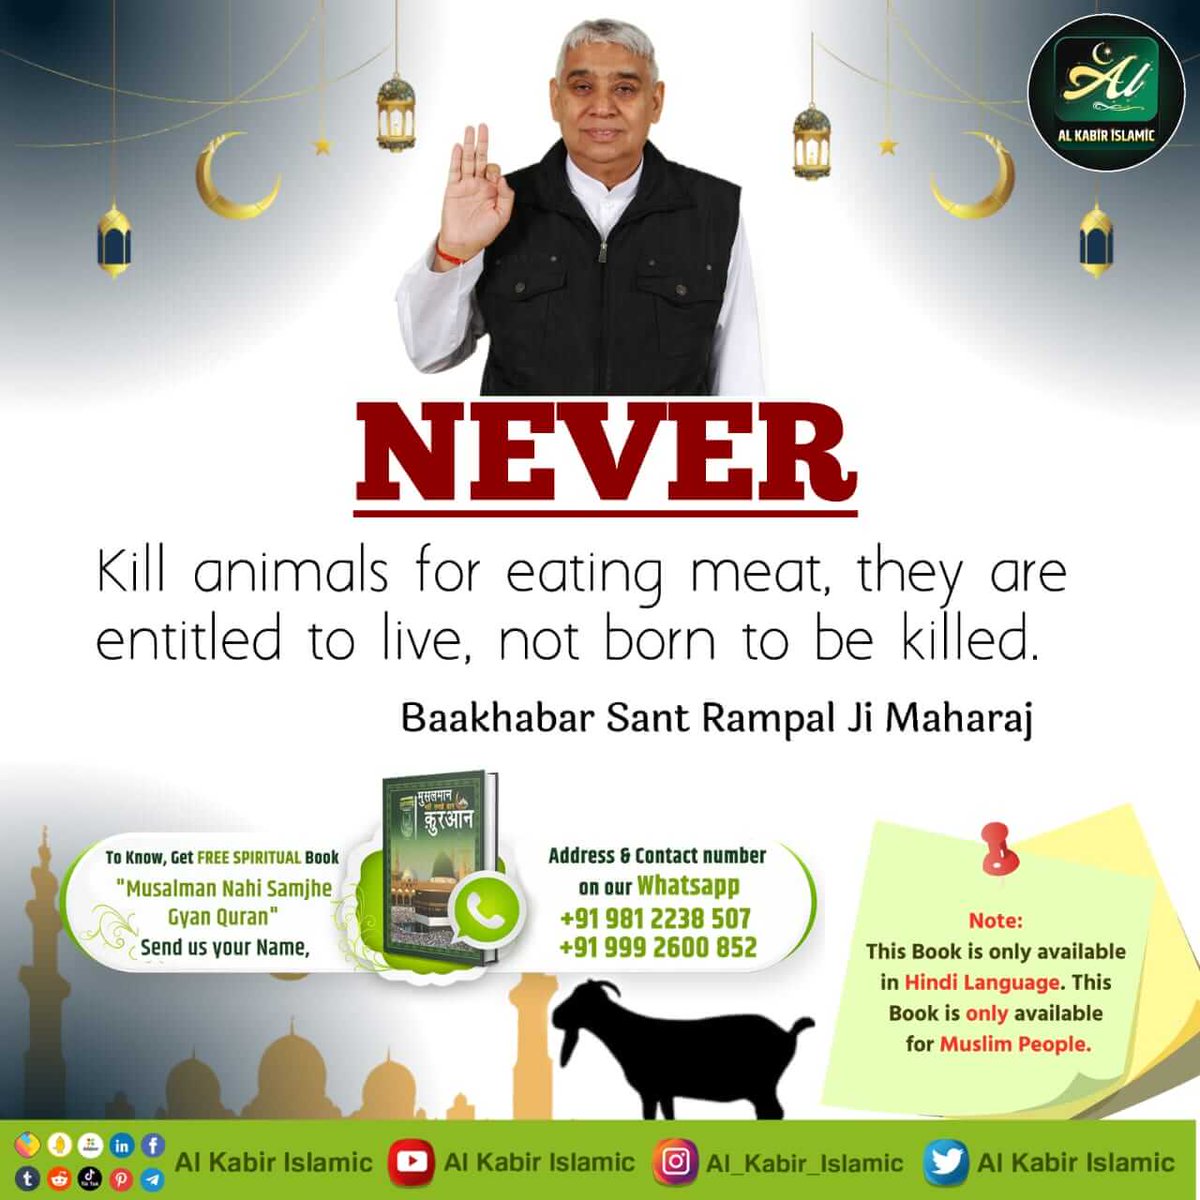 #रहम_करो_मूक_जीवों_पर
Kabir Parmatma has said that eat good vegetarian food. Cook Basmati rice. Add ghee and sugar (sweet) in it and eat and do bhakti. Give up bad (sinful) deeds. Do not cook meat in mud.
Must read the Holy book Muslman Nahi Samjhe Gyan Quran'
#GodMorningThursday